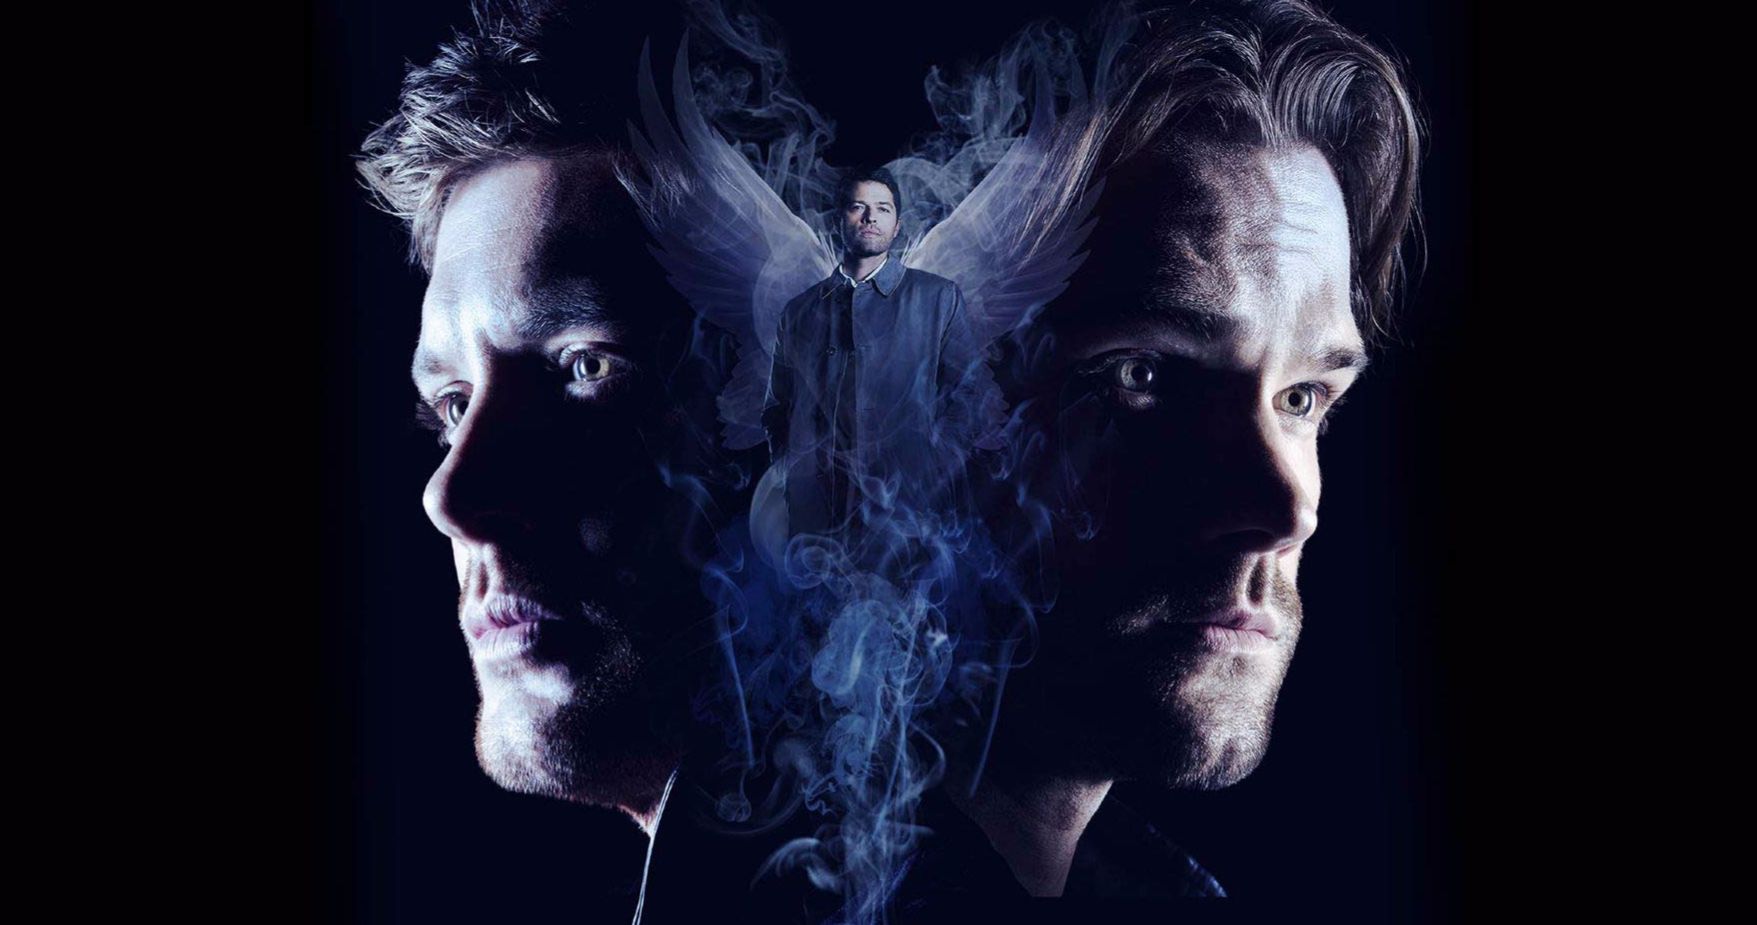 Supernatural Season 14 Blu-ray Brings the Winchesters Home This September